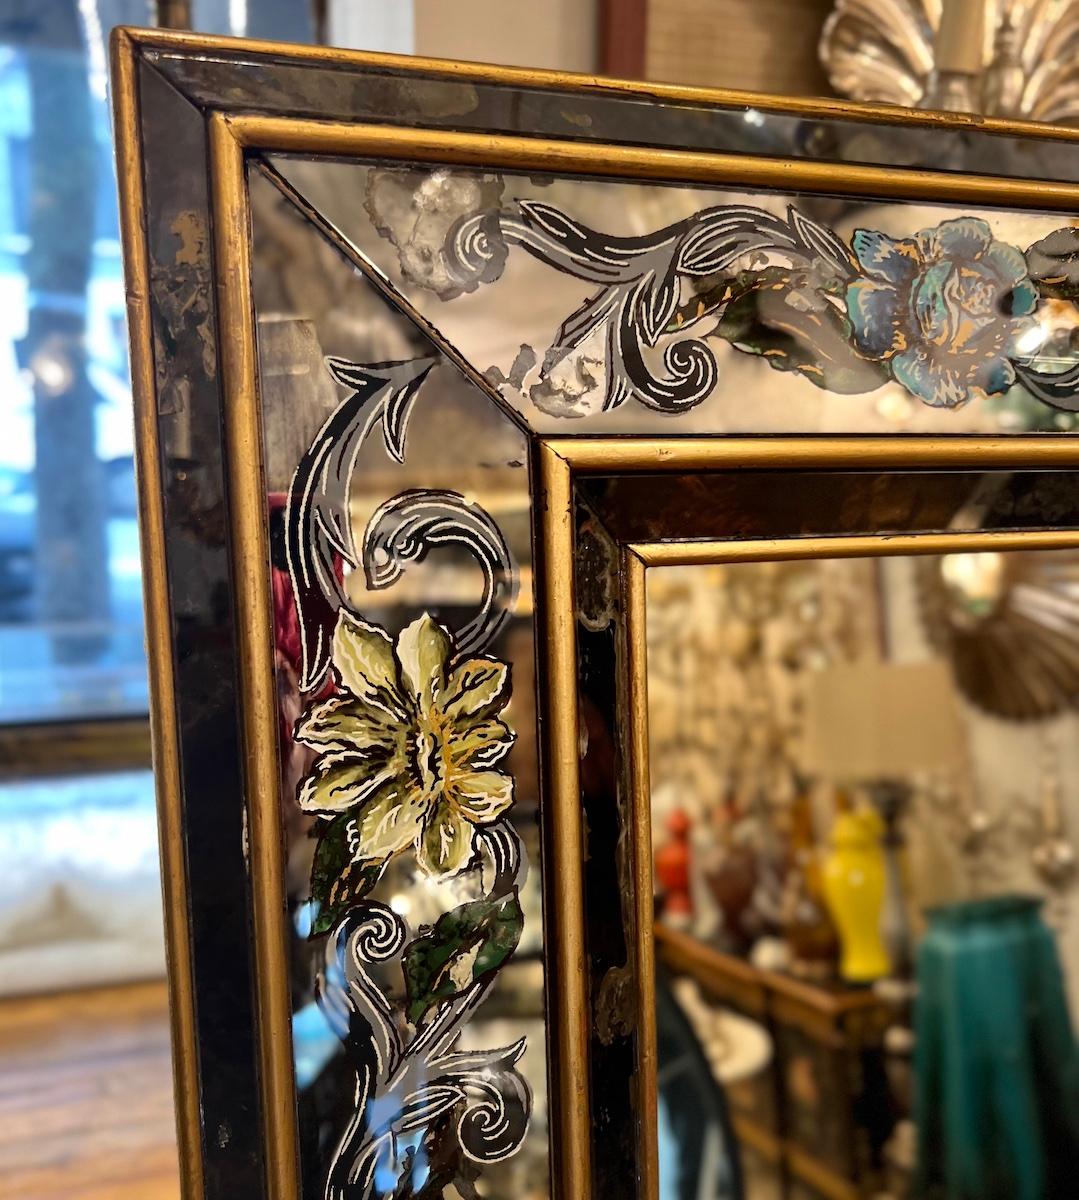 A circa 1950s French reverse-painted mirror with floral decoration.

Measurements:
Height: 56.75